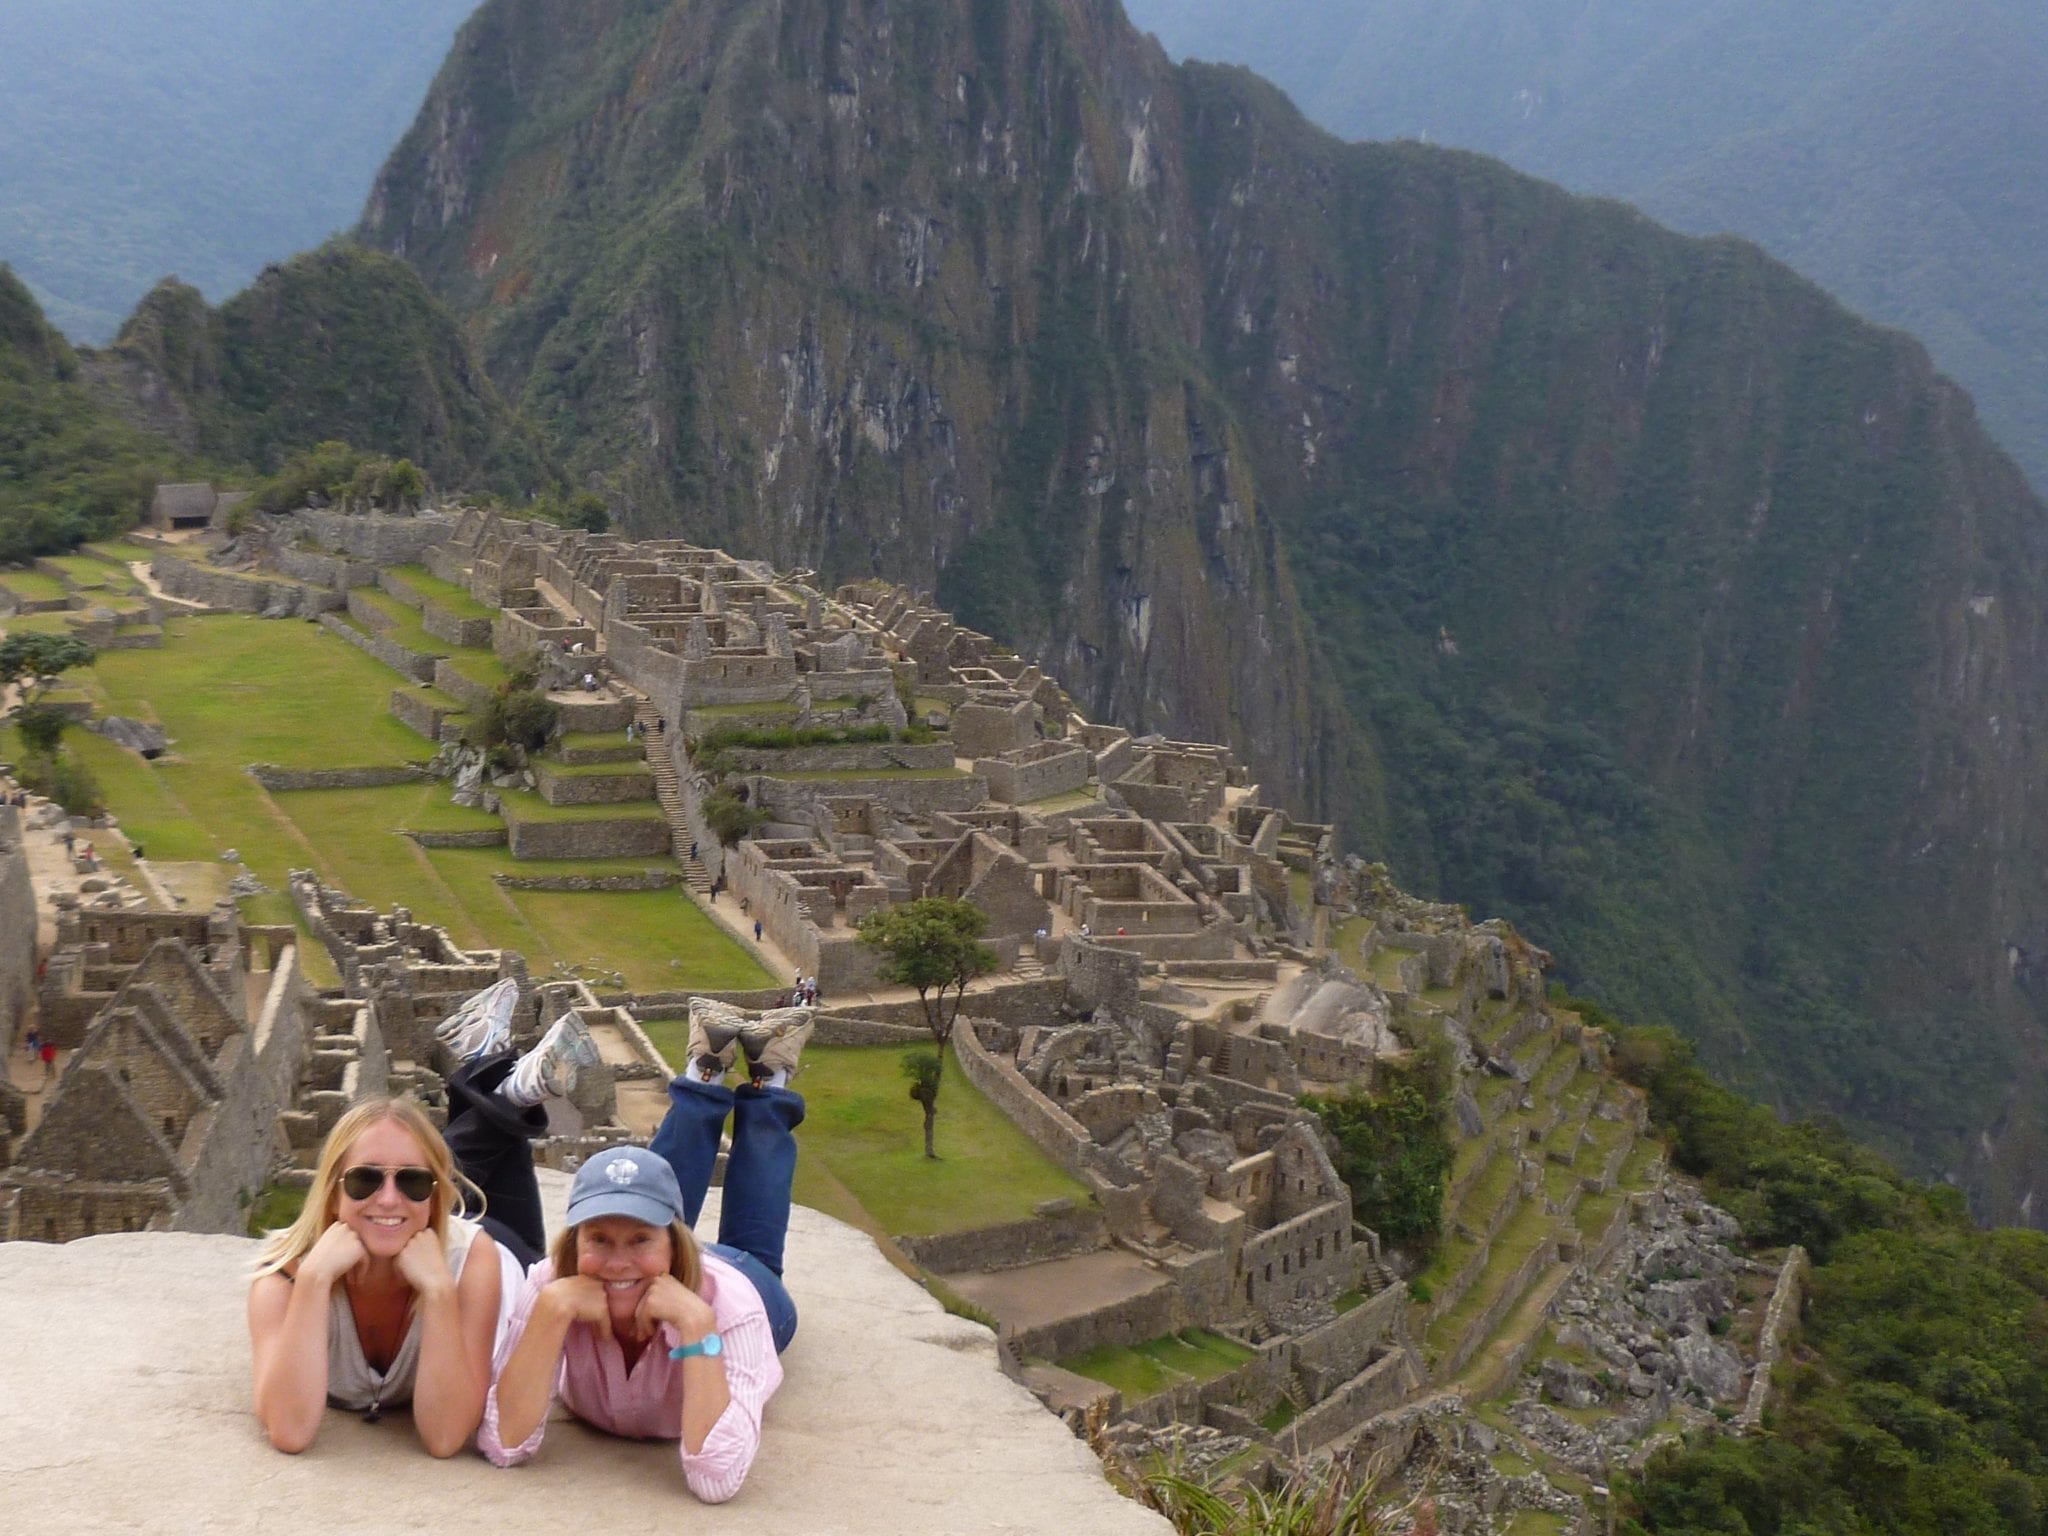 After a strenuous hike up the Inca Trail above Machu Picchu, we're taking it easy. 